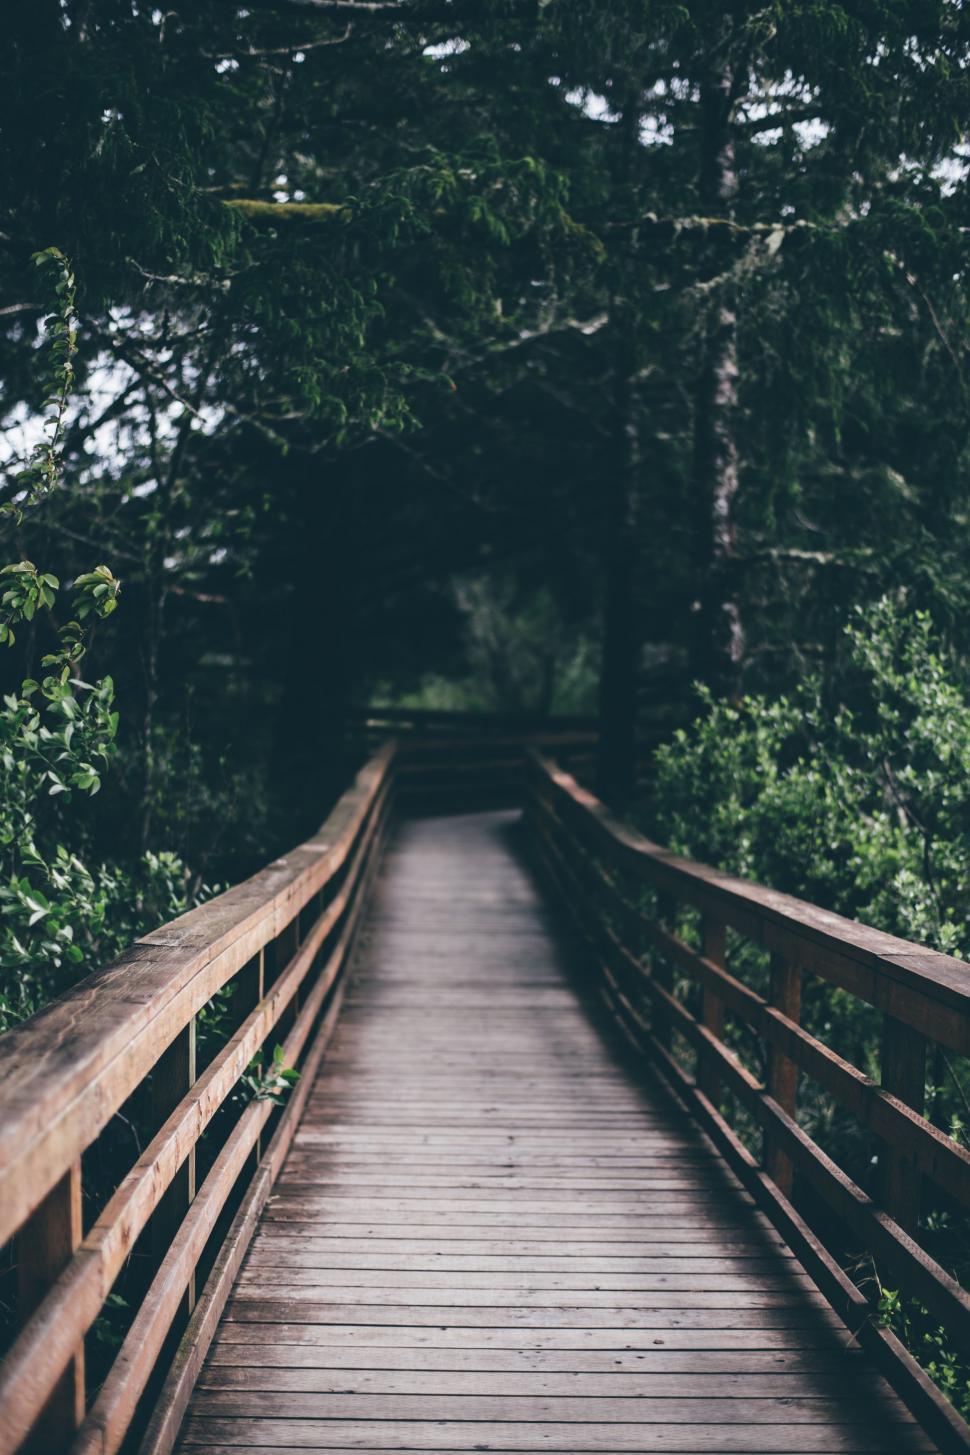 Free Image of Wooden Bridge in a Forest 